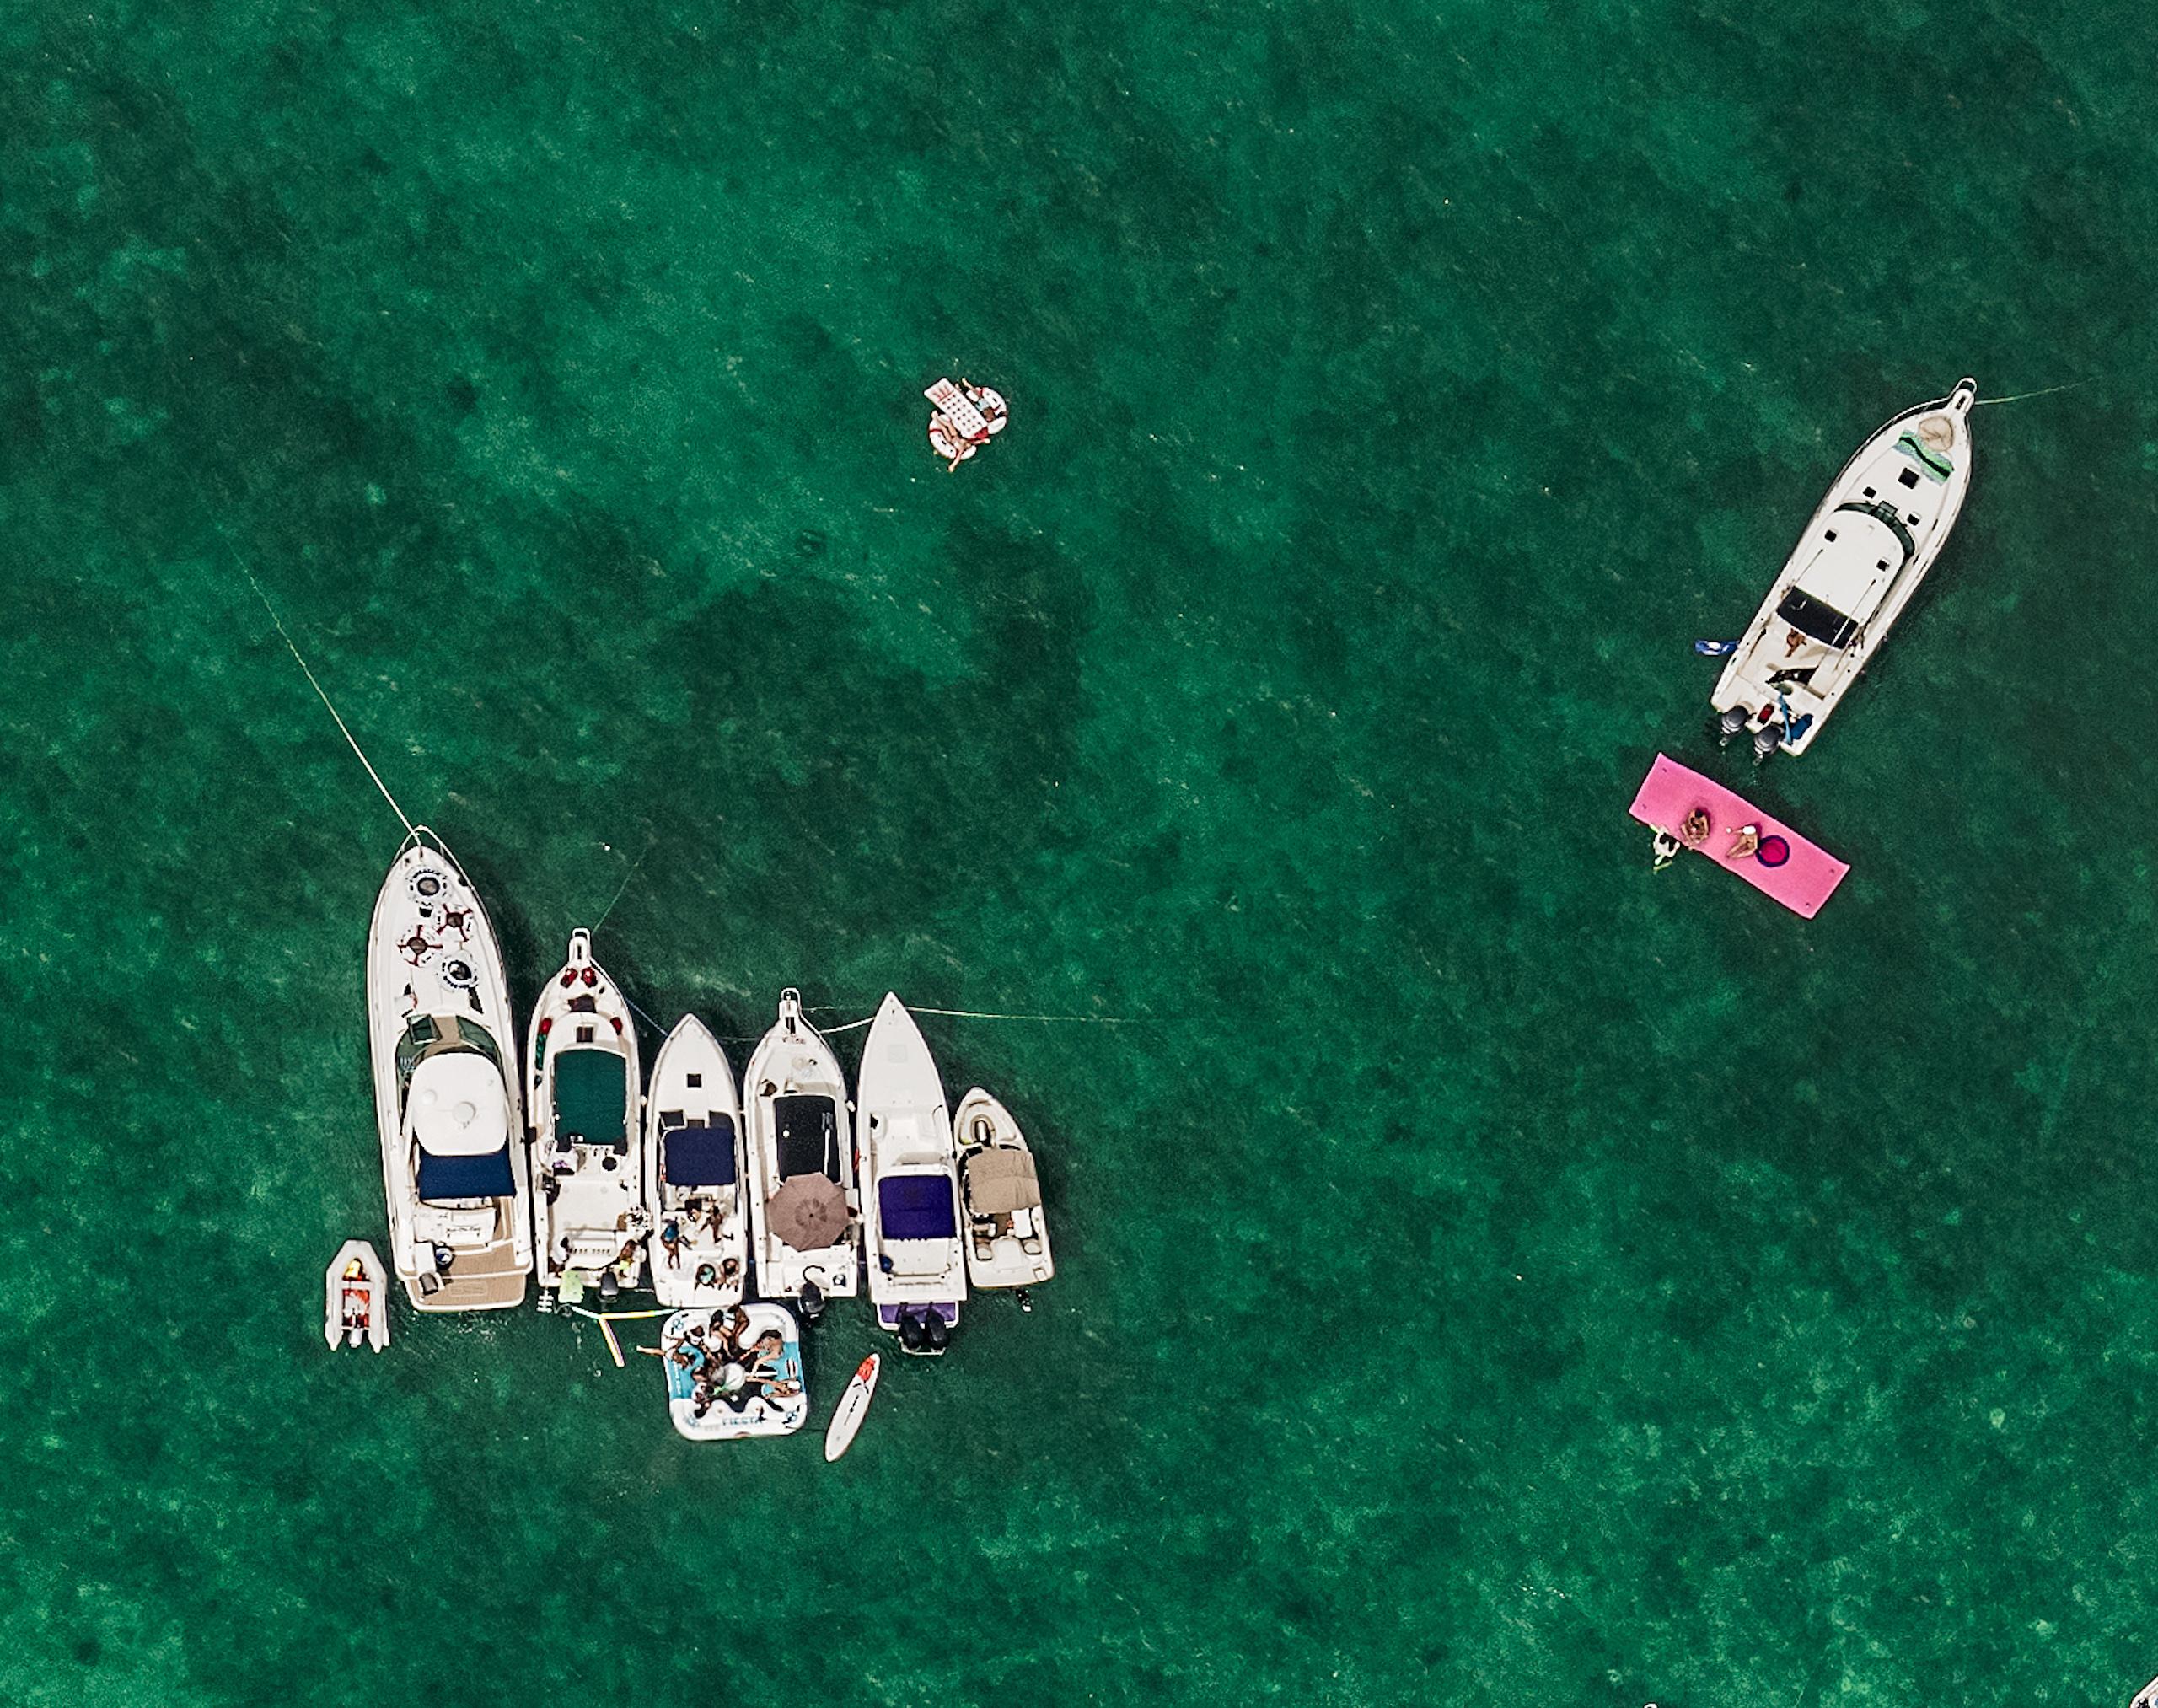 Miami II 011 by Bernhard Lang - aerial abstract photography, sea with boats For Sale 2